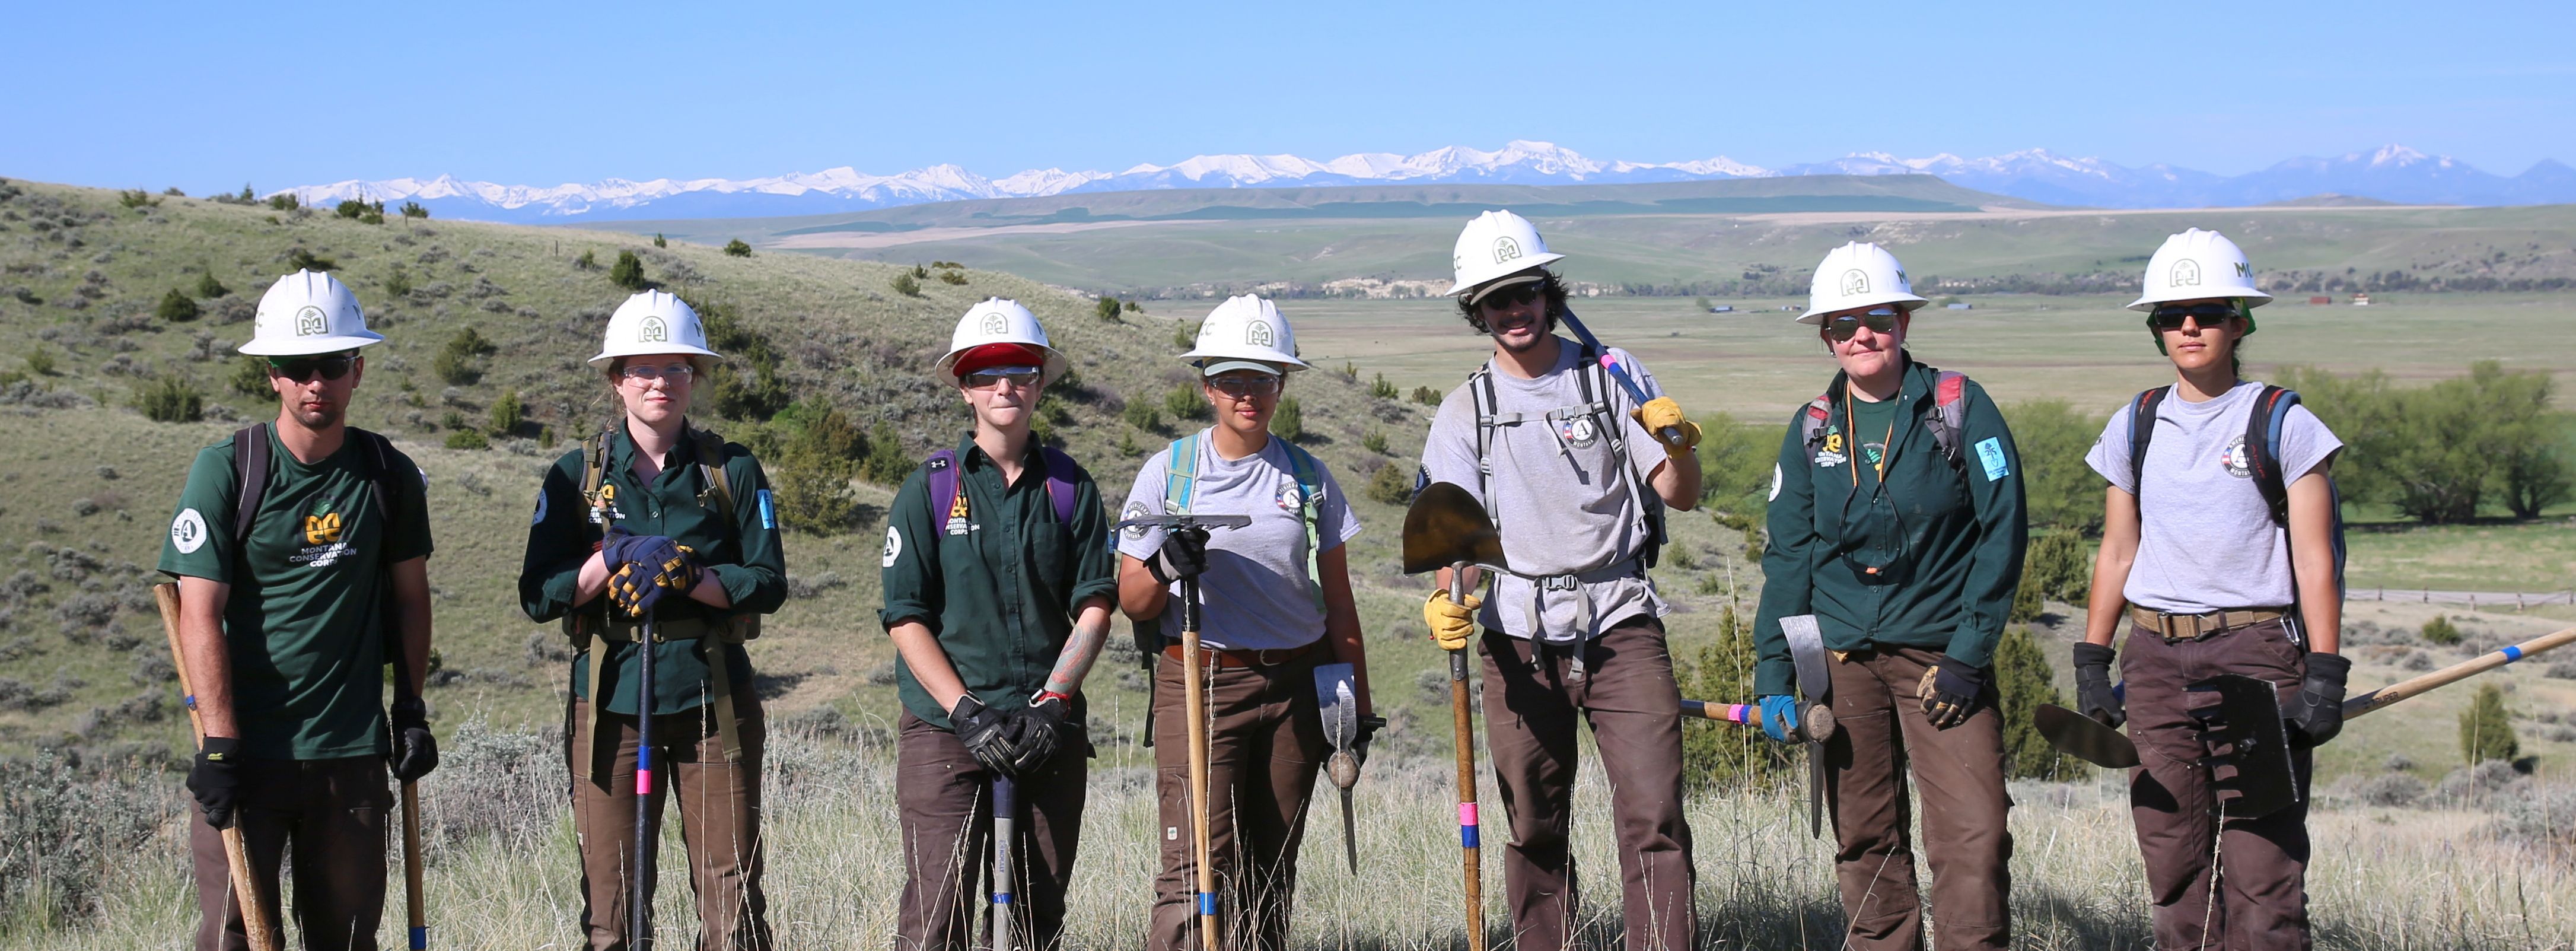 [Image Description: Seven MCC members holding their trail tools, donning their uniforms and hard hats. In the background is a mountain range, completely blanketed in snow.]